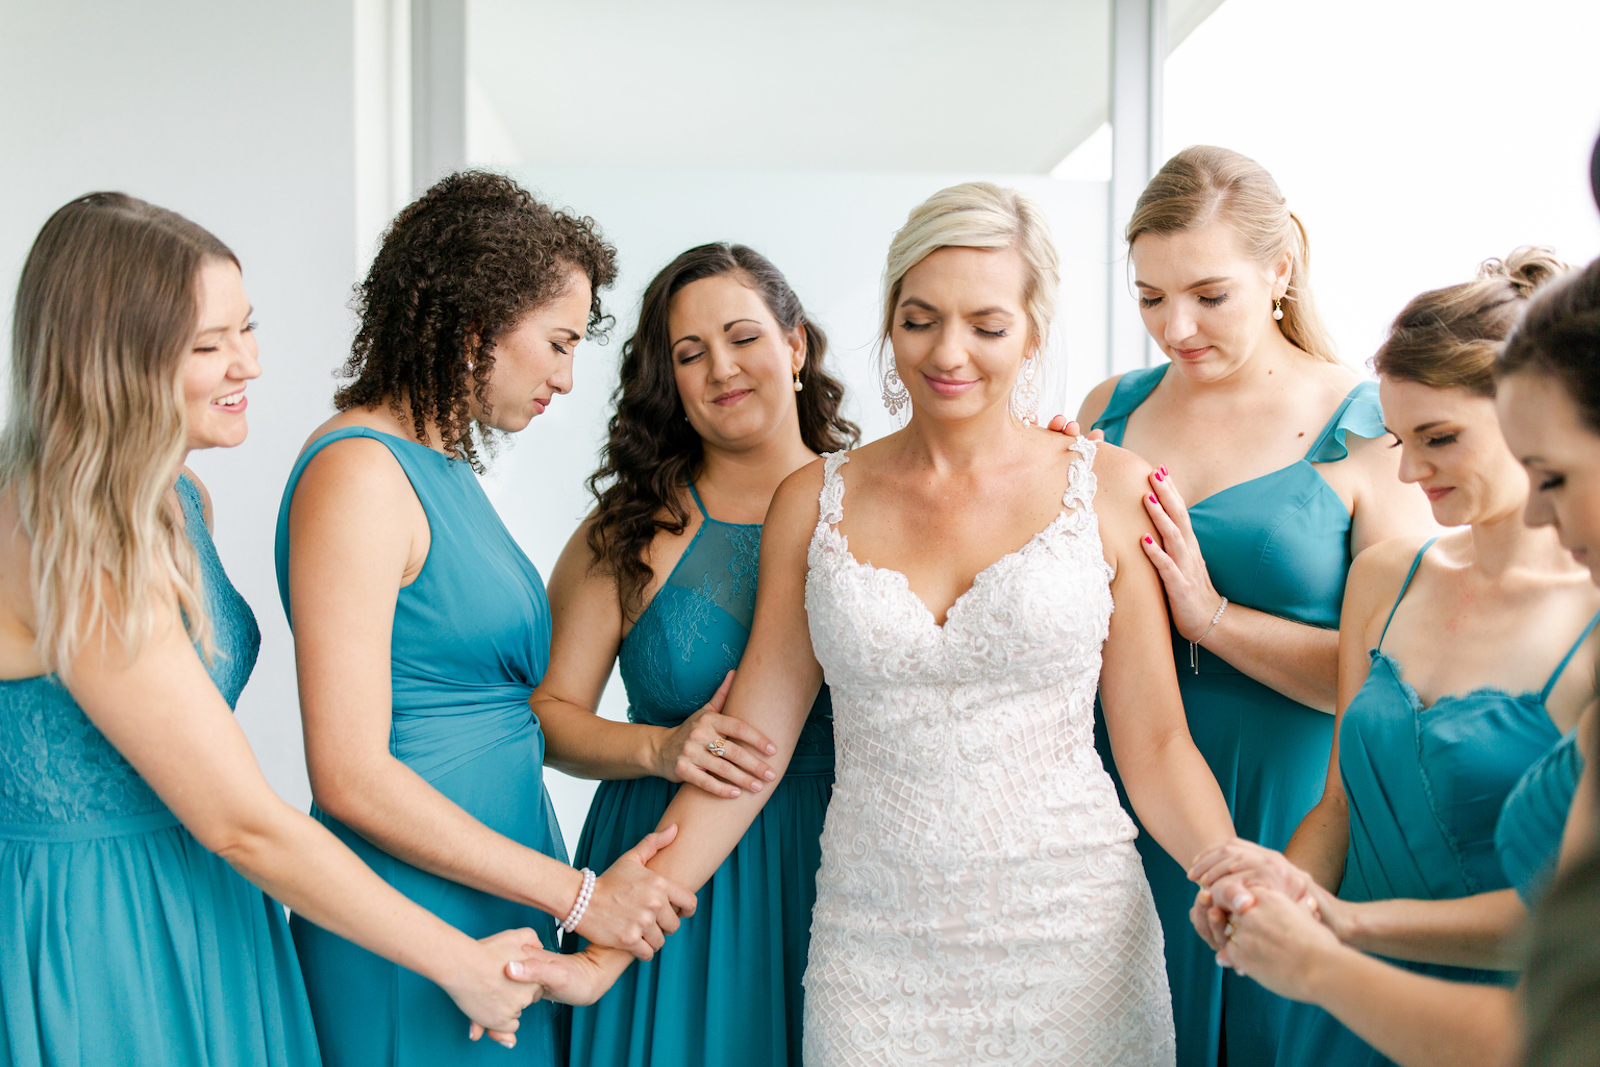 Tampa Bay Bride in Lace V Neckline Wedding Dress with Straps Praying with Bridesmaids in Mix and Match Teal Dresses